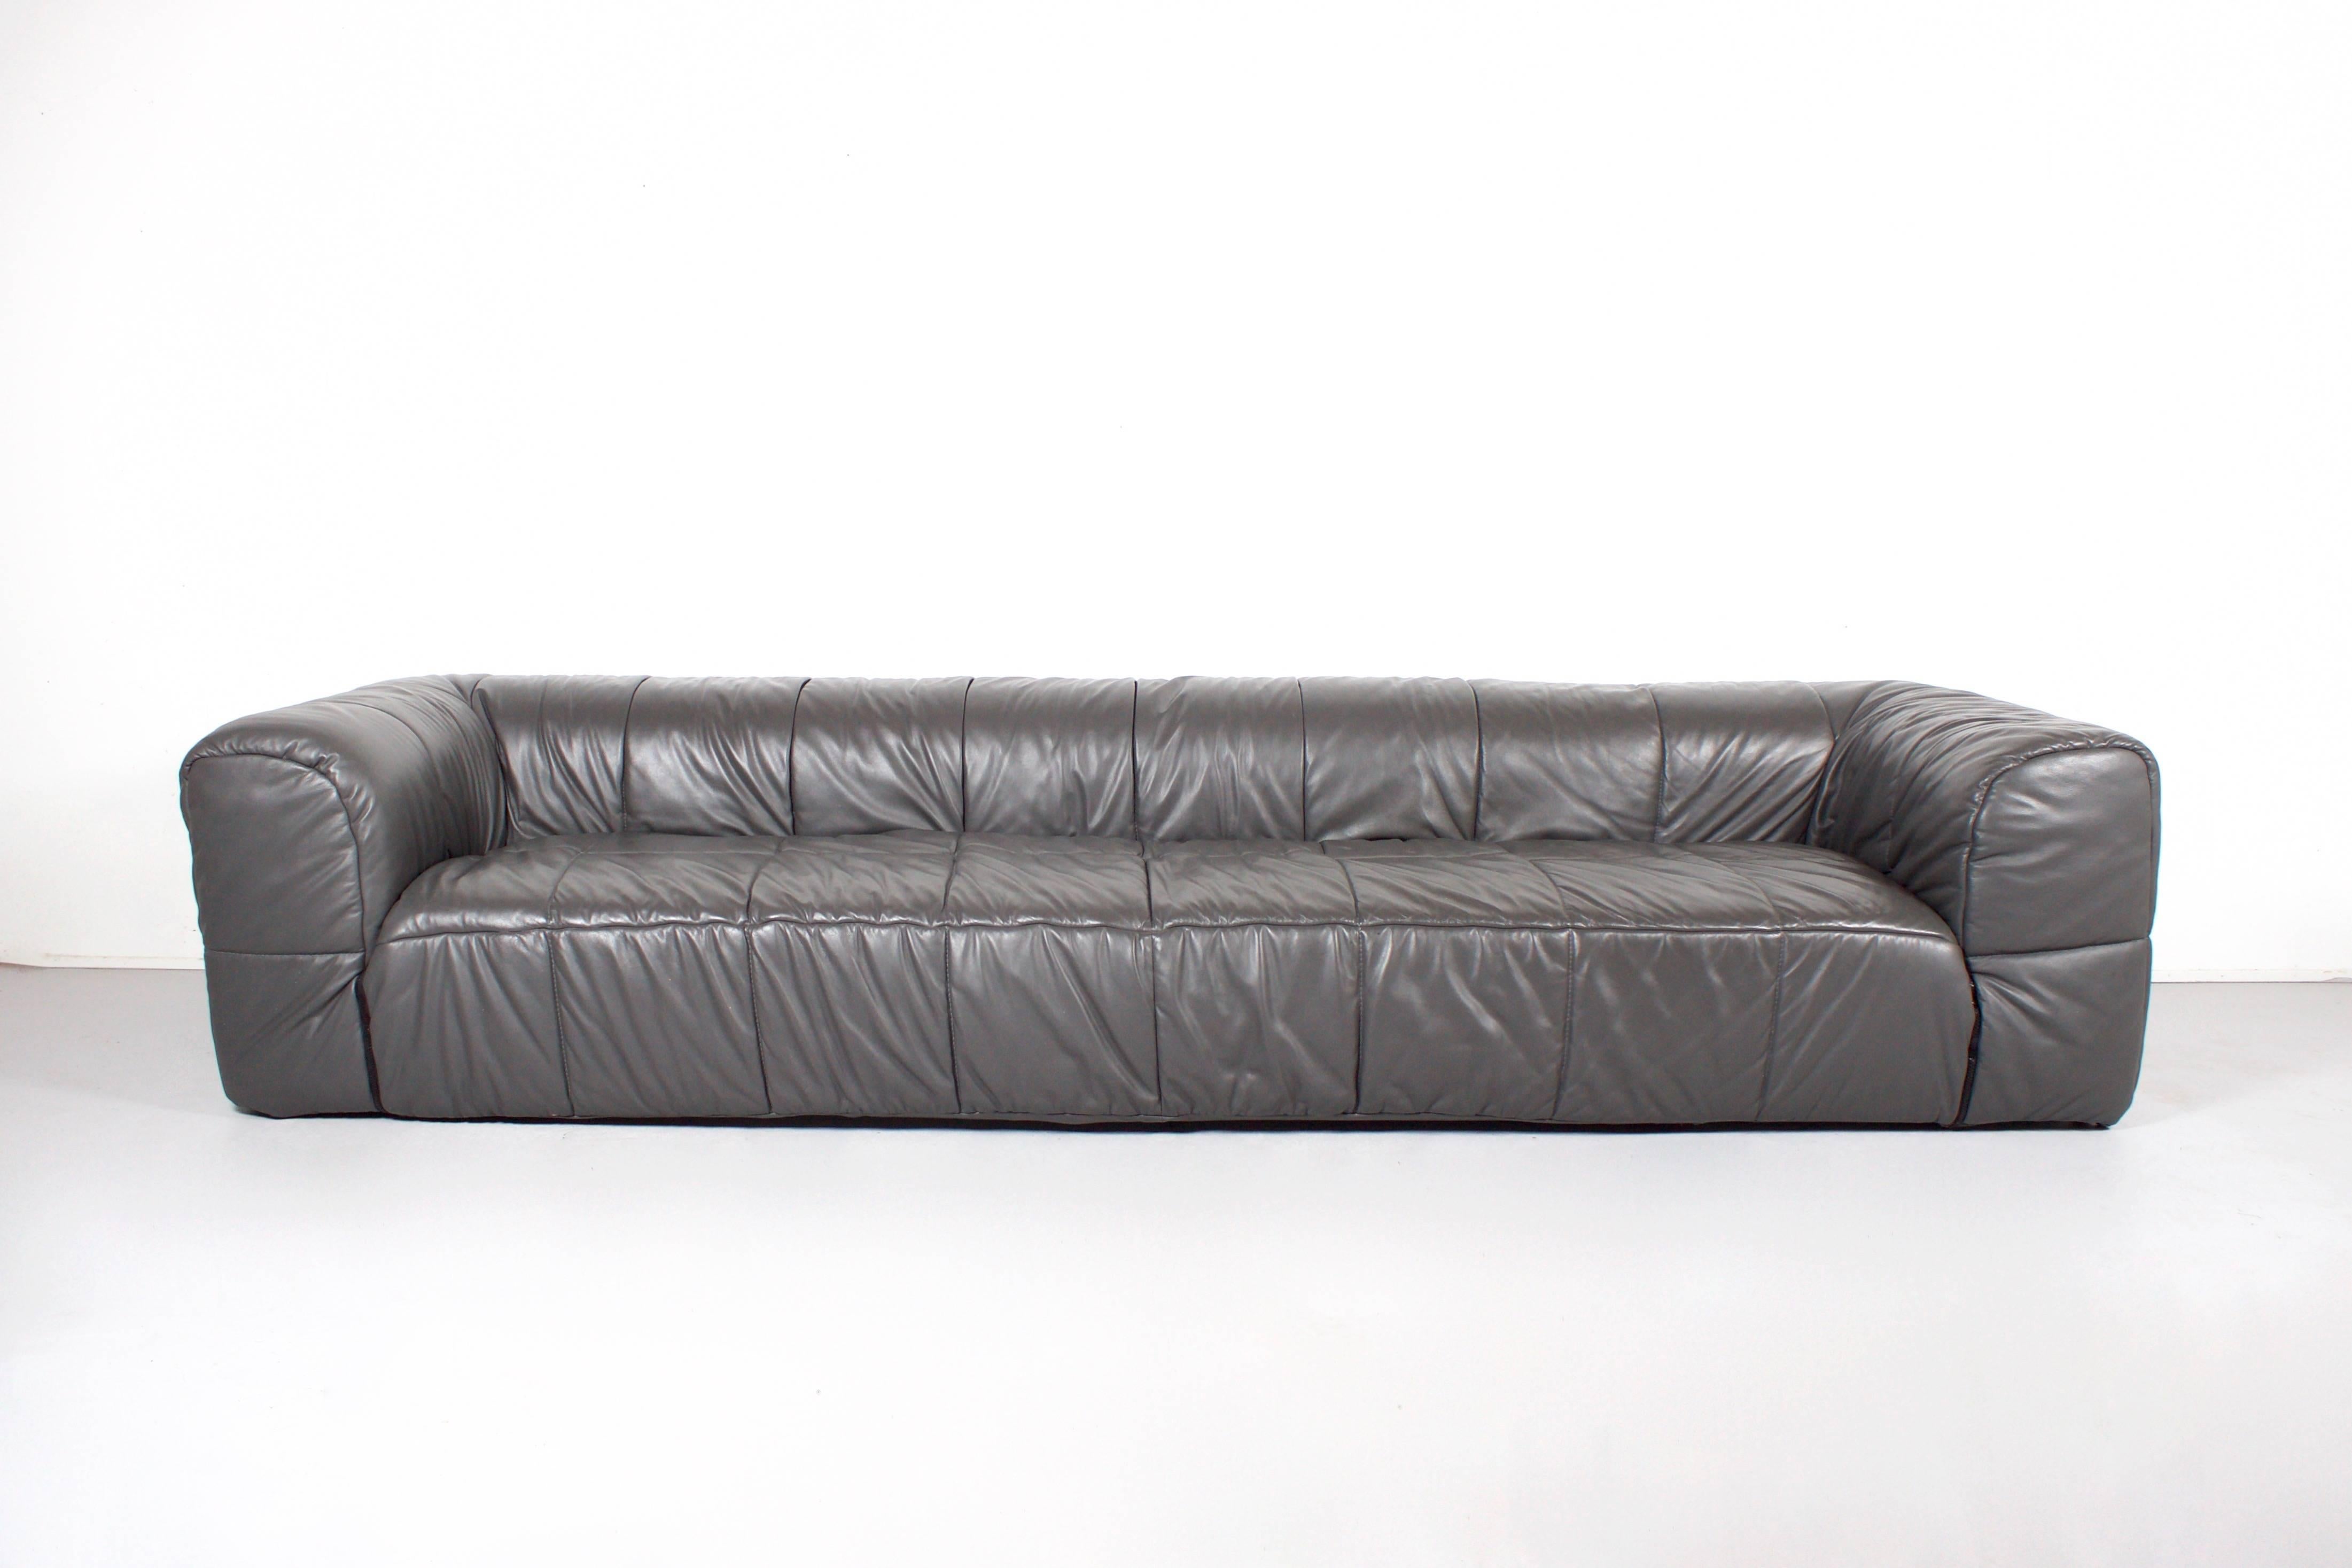 Large leather ‘Strips’ sofa in very good condition.

Designed by China Boeri in 1968 and manufactured by Arflex Italy.

The main characteristic of this sofa is the loose removable quilted cover which reproduces the feel and look of a down filled